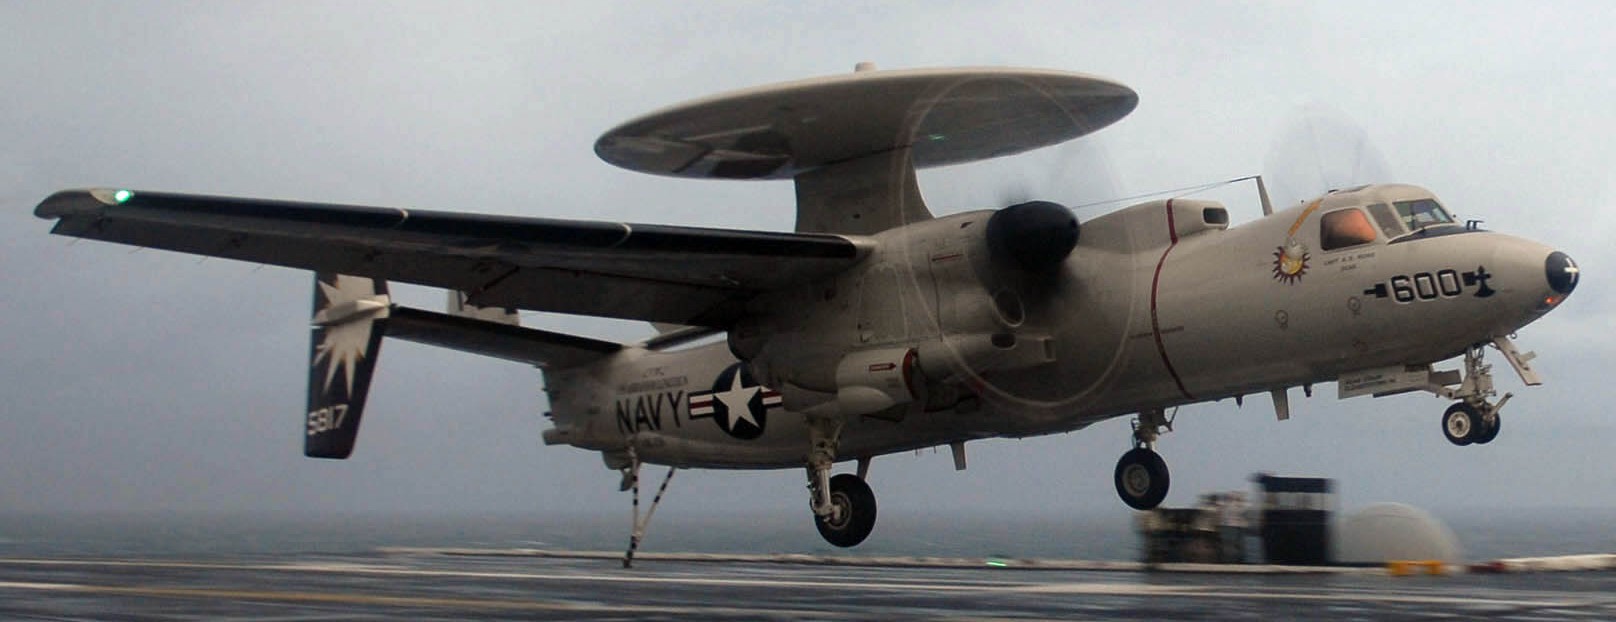 vaw-116 sun kings airborne command control squadron carrier early warning cvw-2 uss abraham lincoln cvn-72 15